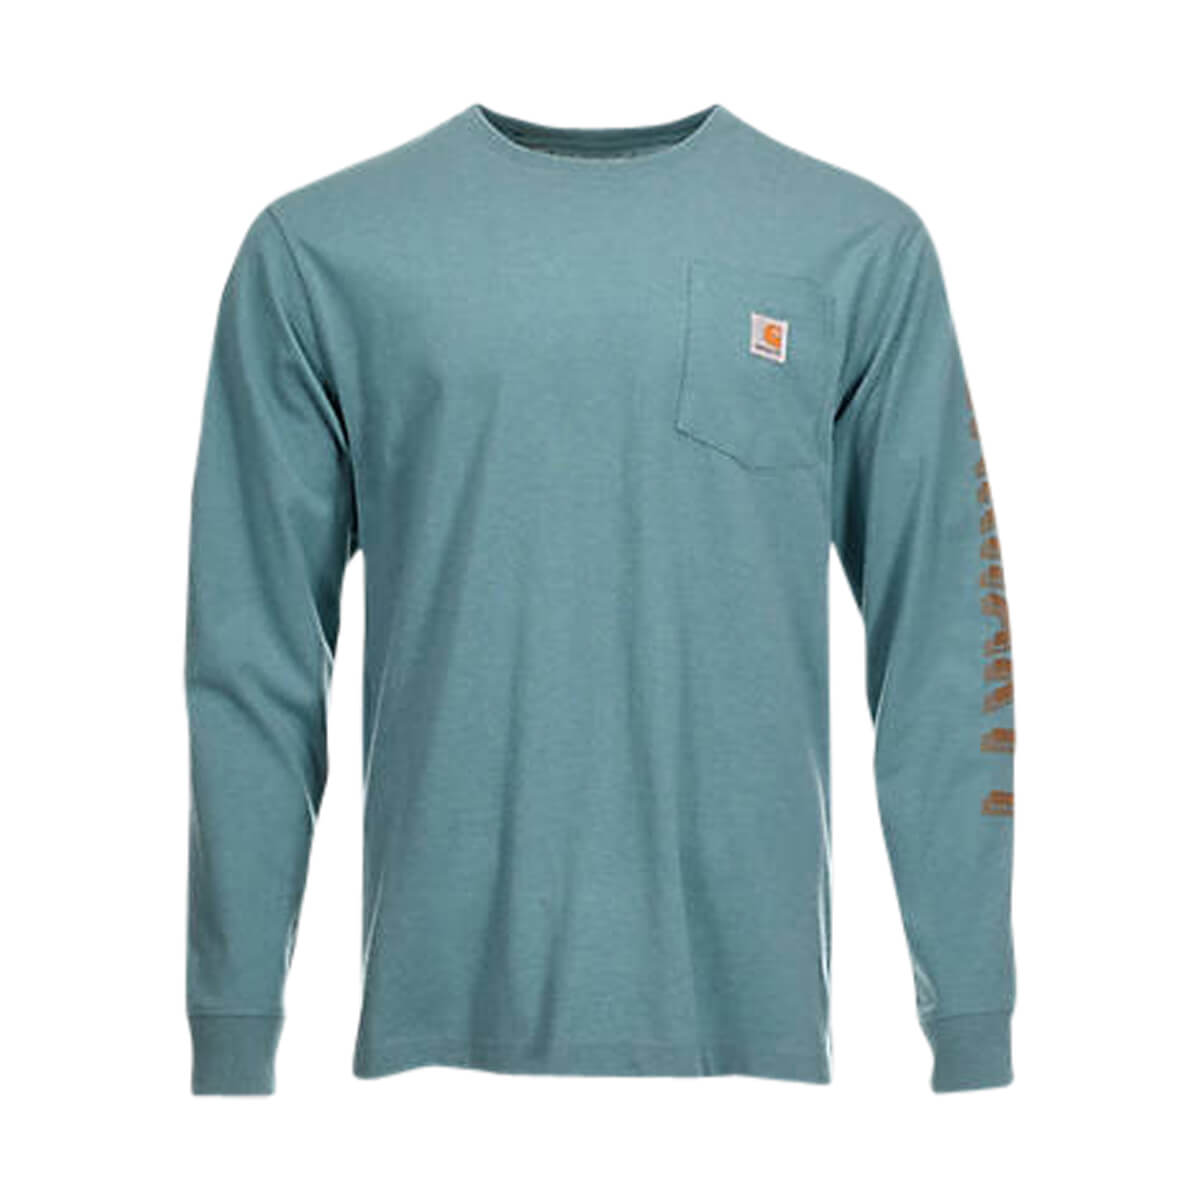 Men's Loose Fit Heavyweight Exclusive Logo Long-Sleeve Shirt • Blue Spruce